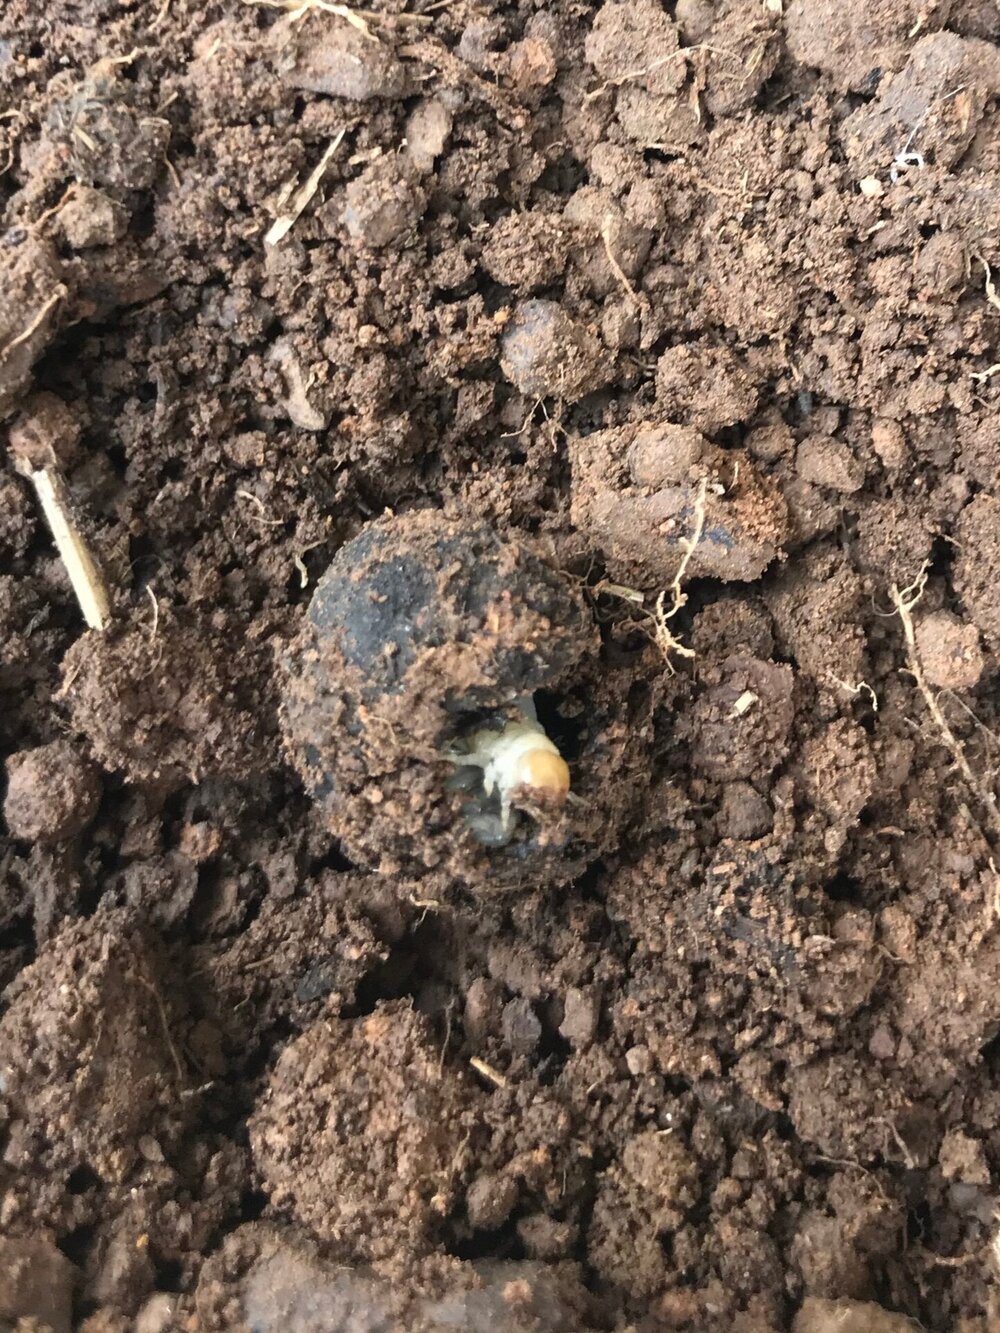 Brood ball with a developing larva, evidence the beetles are breeding